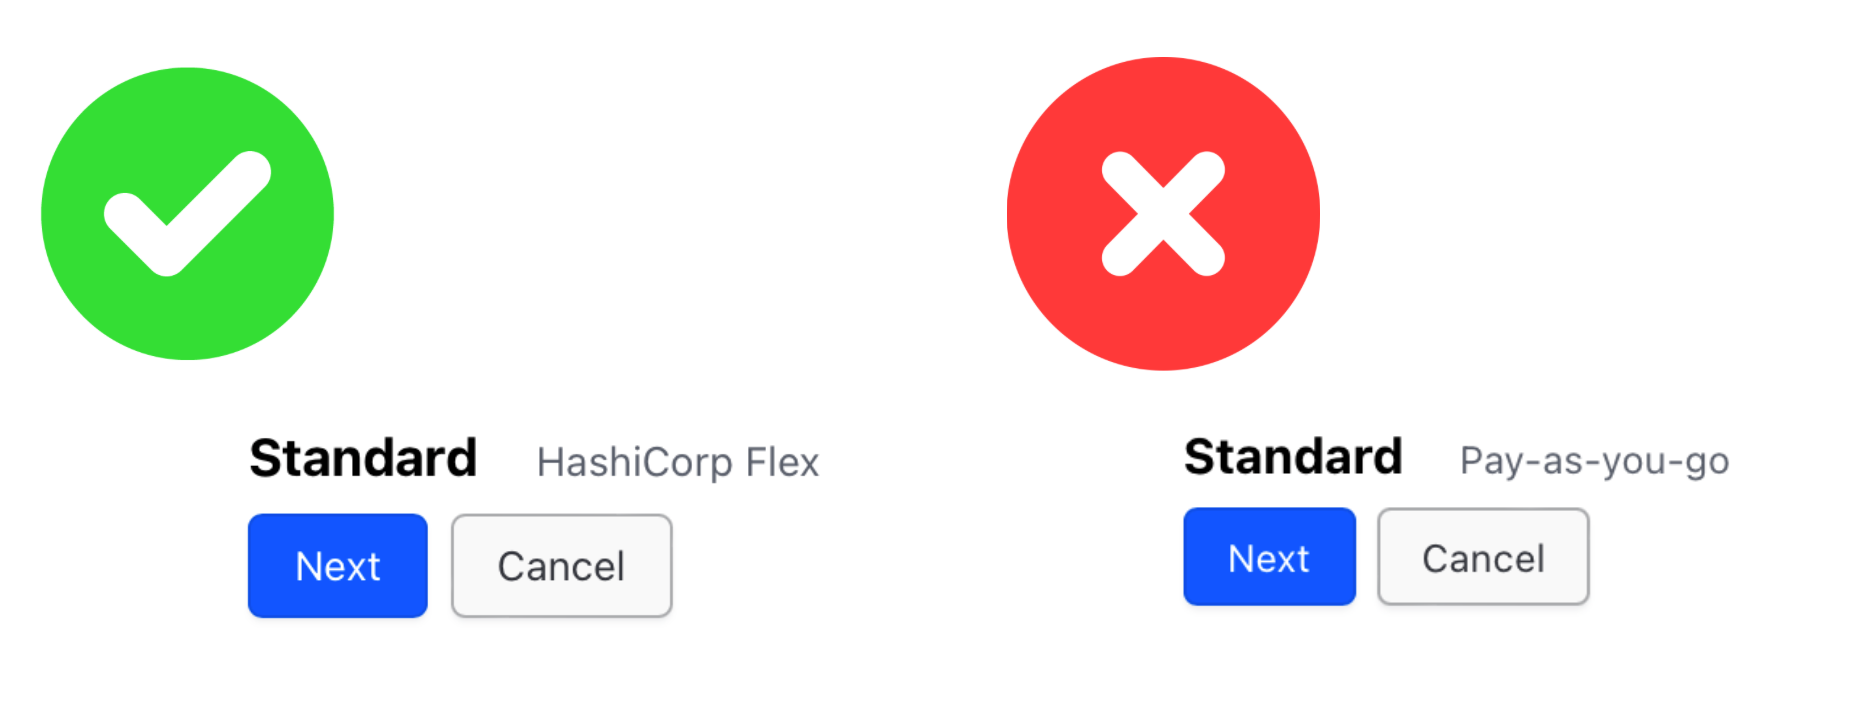 A comparison of the option to activate Flex vs Pay-as-you-go